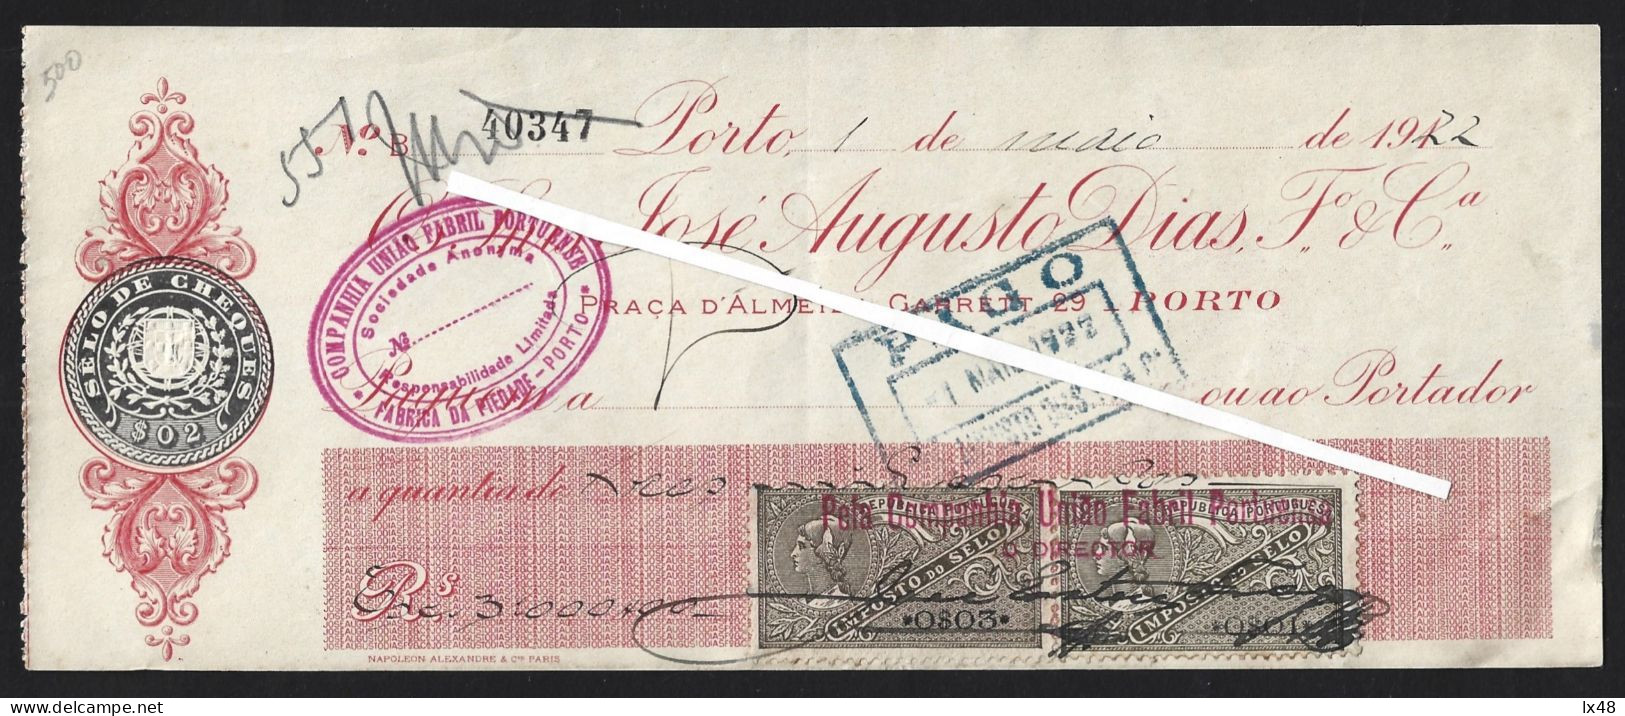 Check From José Augusto Dias Fº Banking House 1910. Check In Réis From CUF, Porto. Check Stamp $02 With Additional Fees. - Cheques & Traveler's Cheques